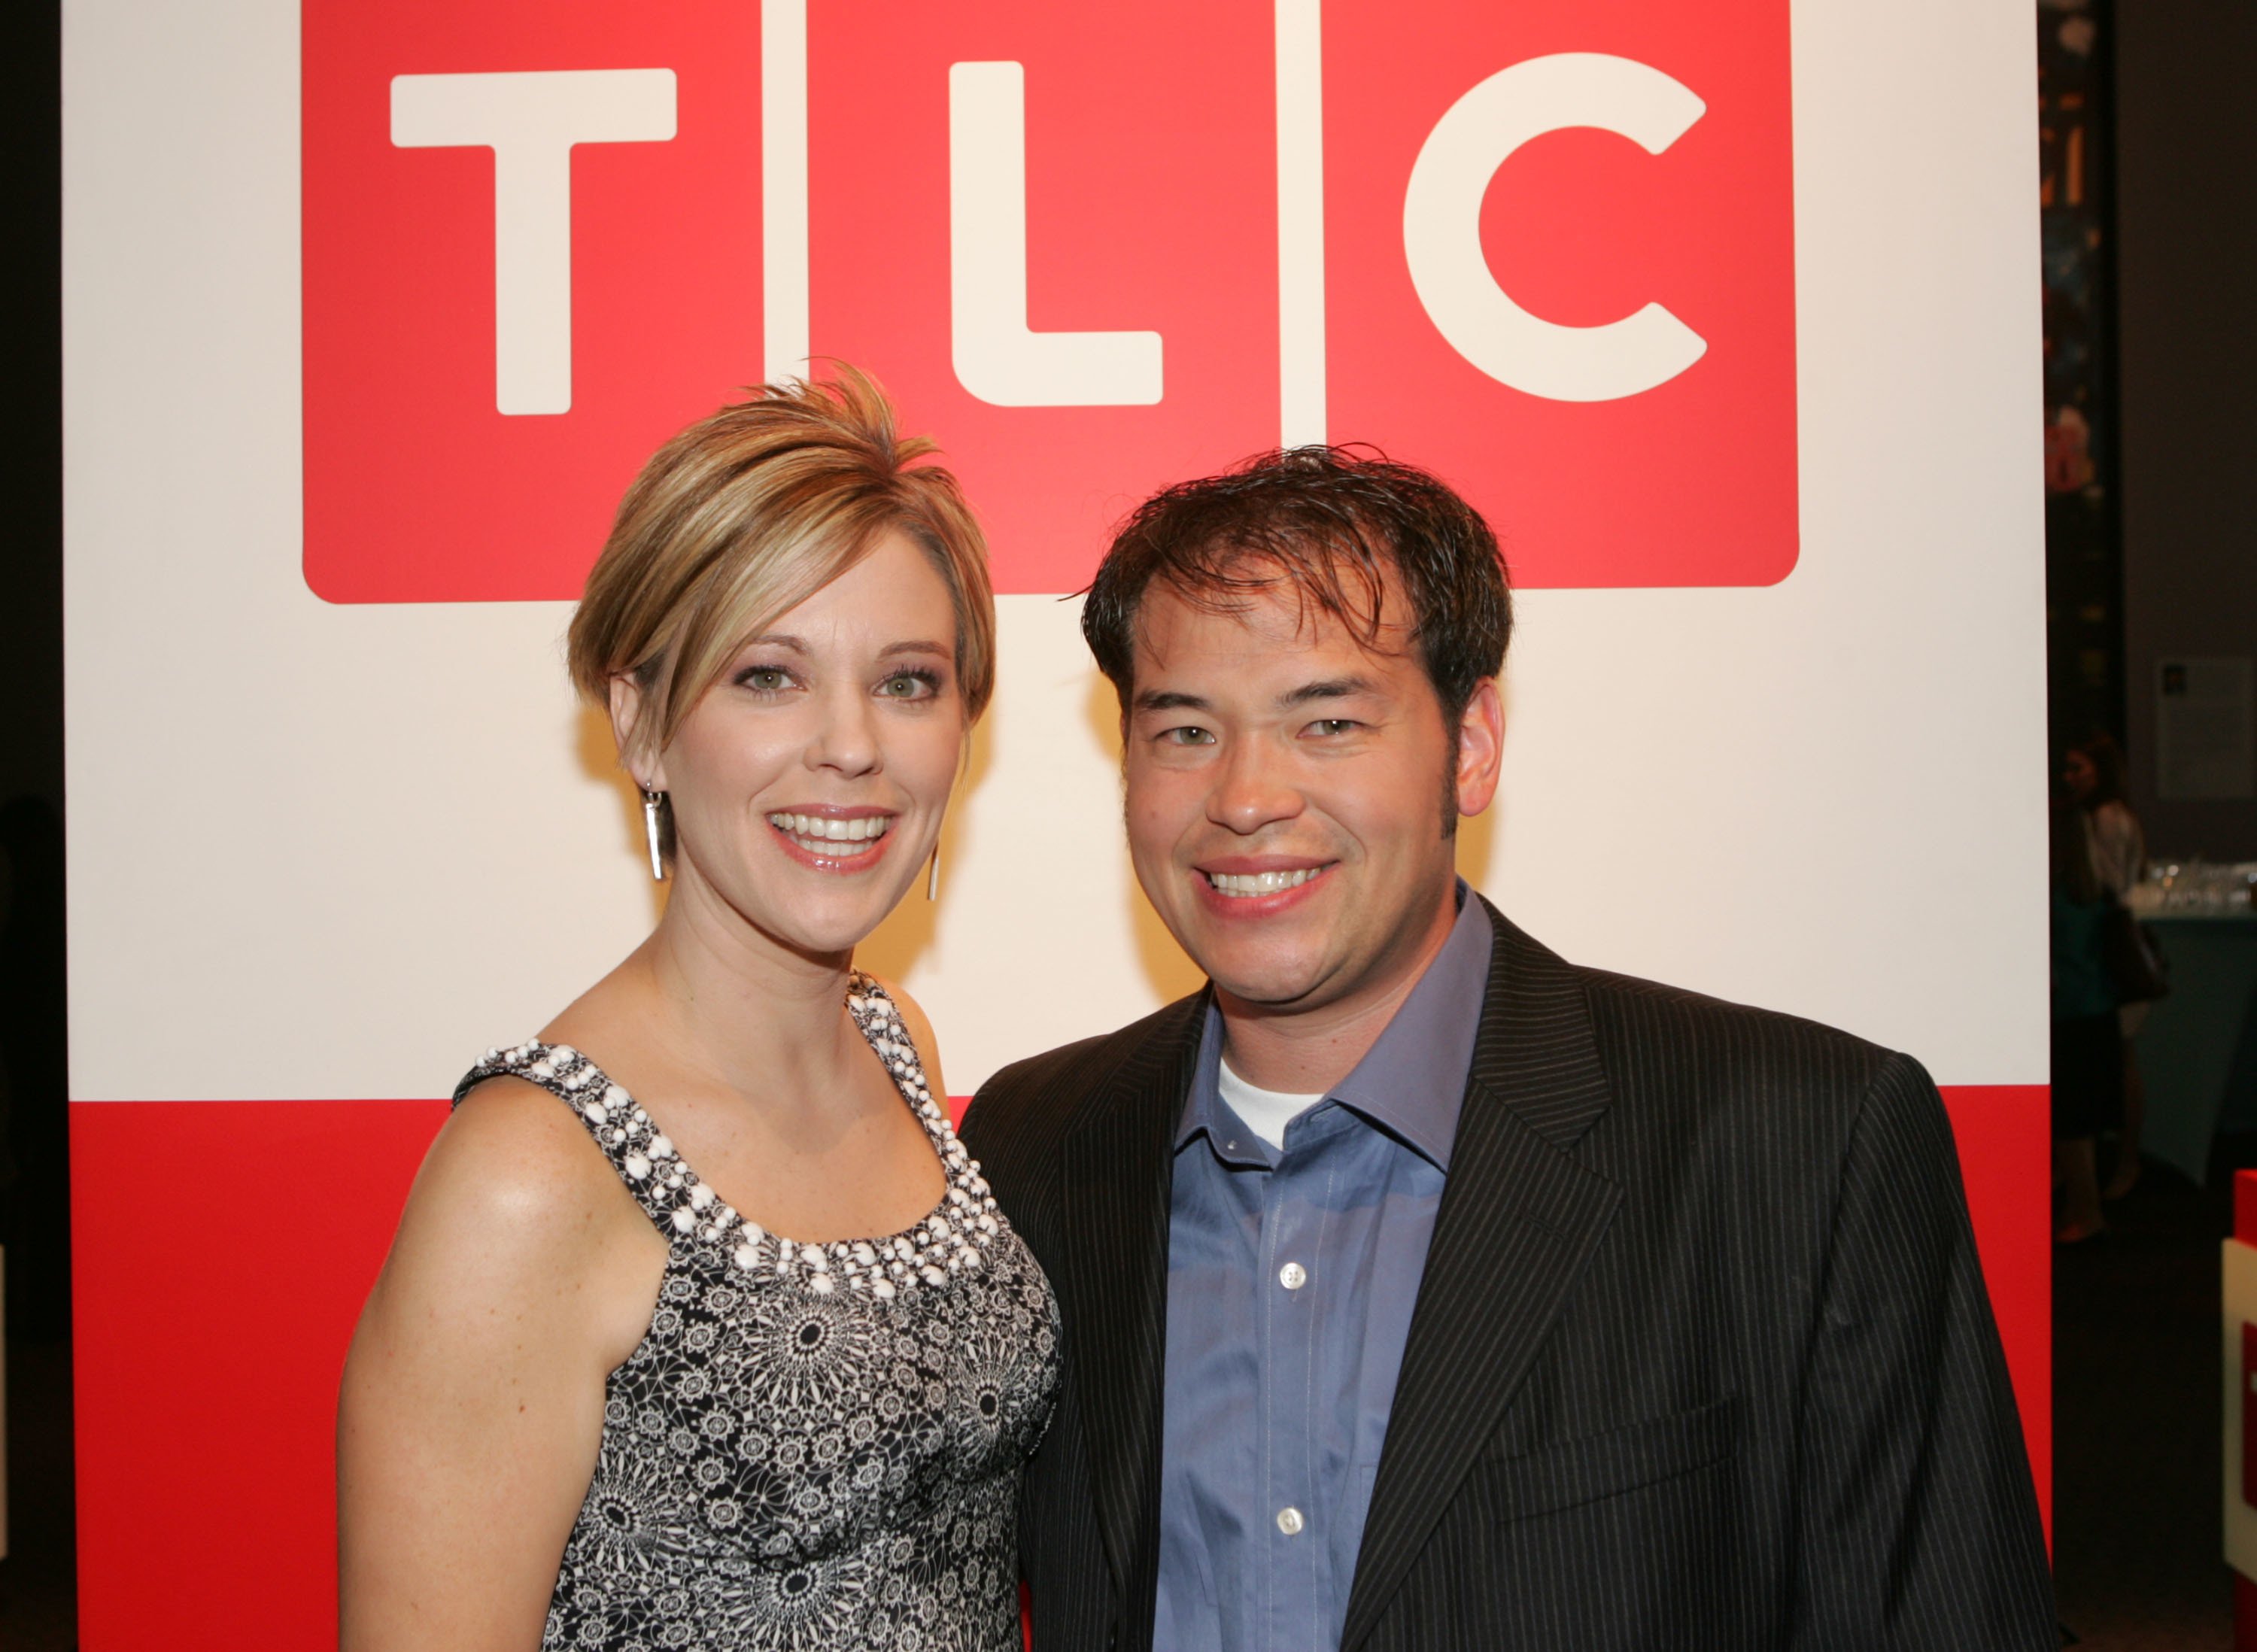 John and Kate Gosselin attend the Discovery Upfront Presentation NY - Talent Images at the Frederick P. Rose Hall on April 23, 2008. | Source: Getty Images 